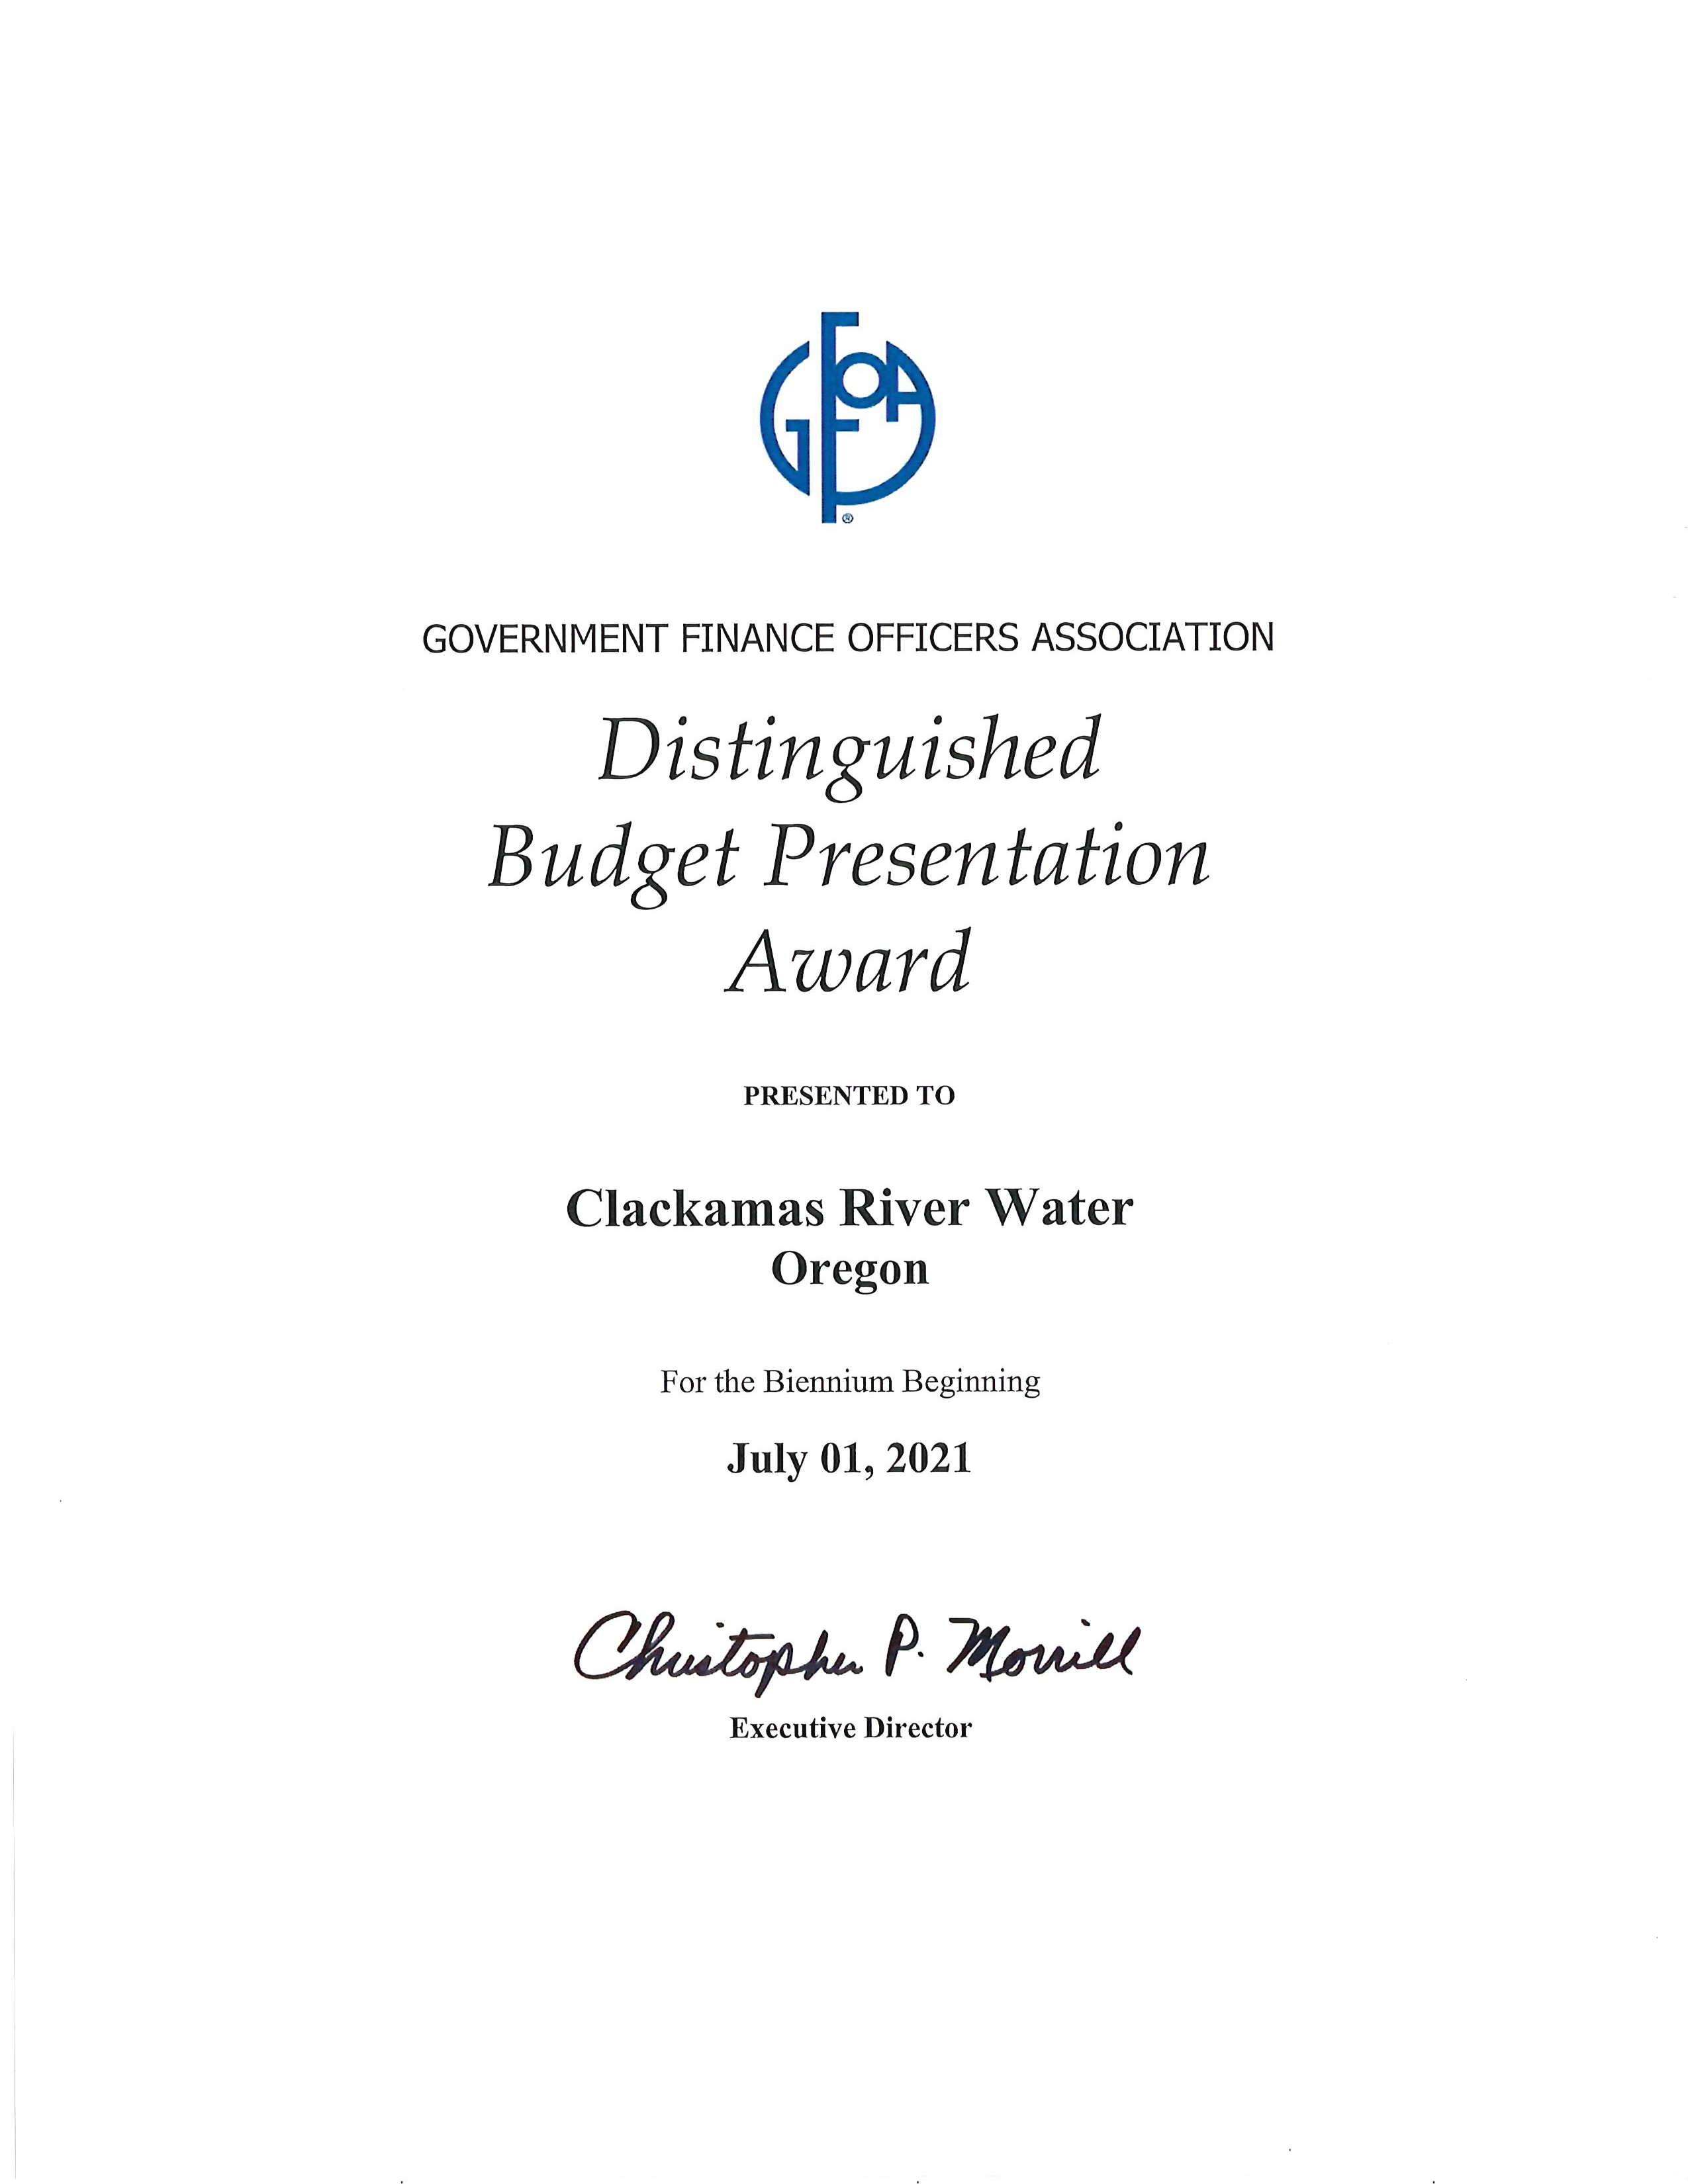 Budget award and press release pic